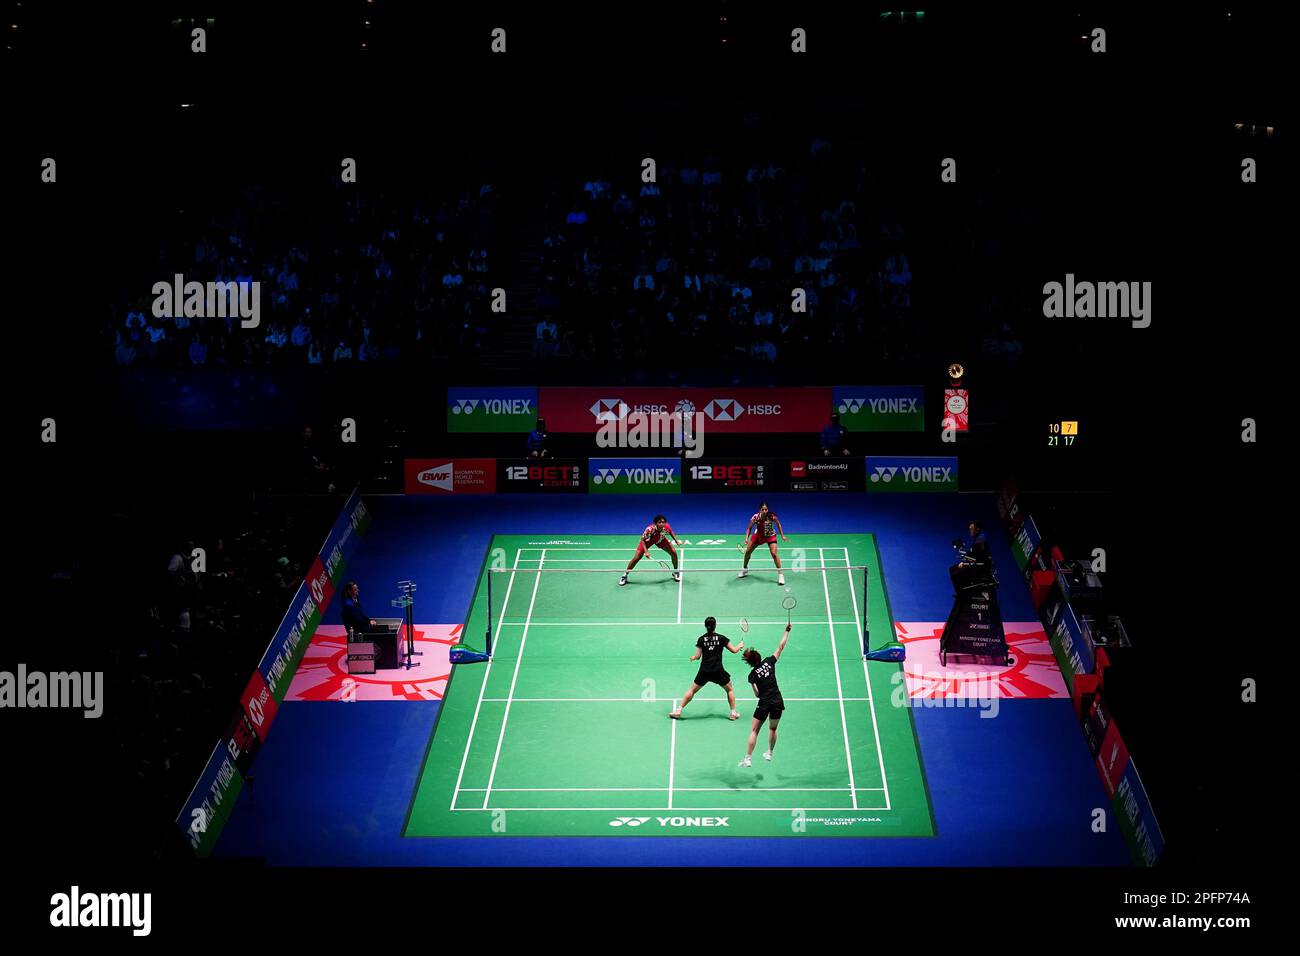 India's Treesa Jolly (top left) and Gayatri Gopichand Pullela (top right) in action against Korea's Baek Ha Na (bottom left) and Lee So Hee during day four of the YONEX All England Open Badminton Championships at the Utilita Arena Birmingham. Picture date: Friday March 17, 2023. Stock Photo